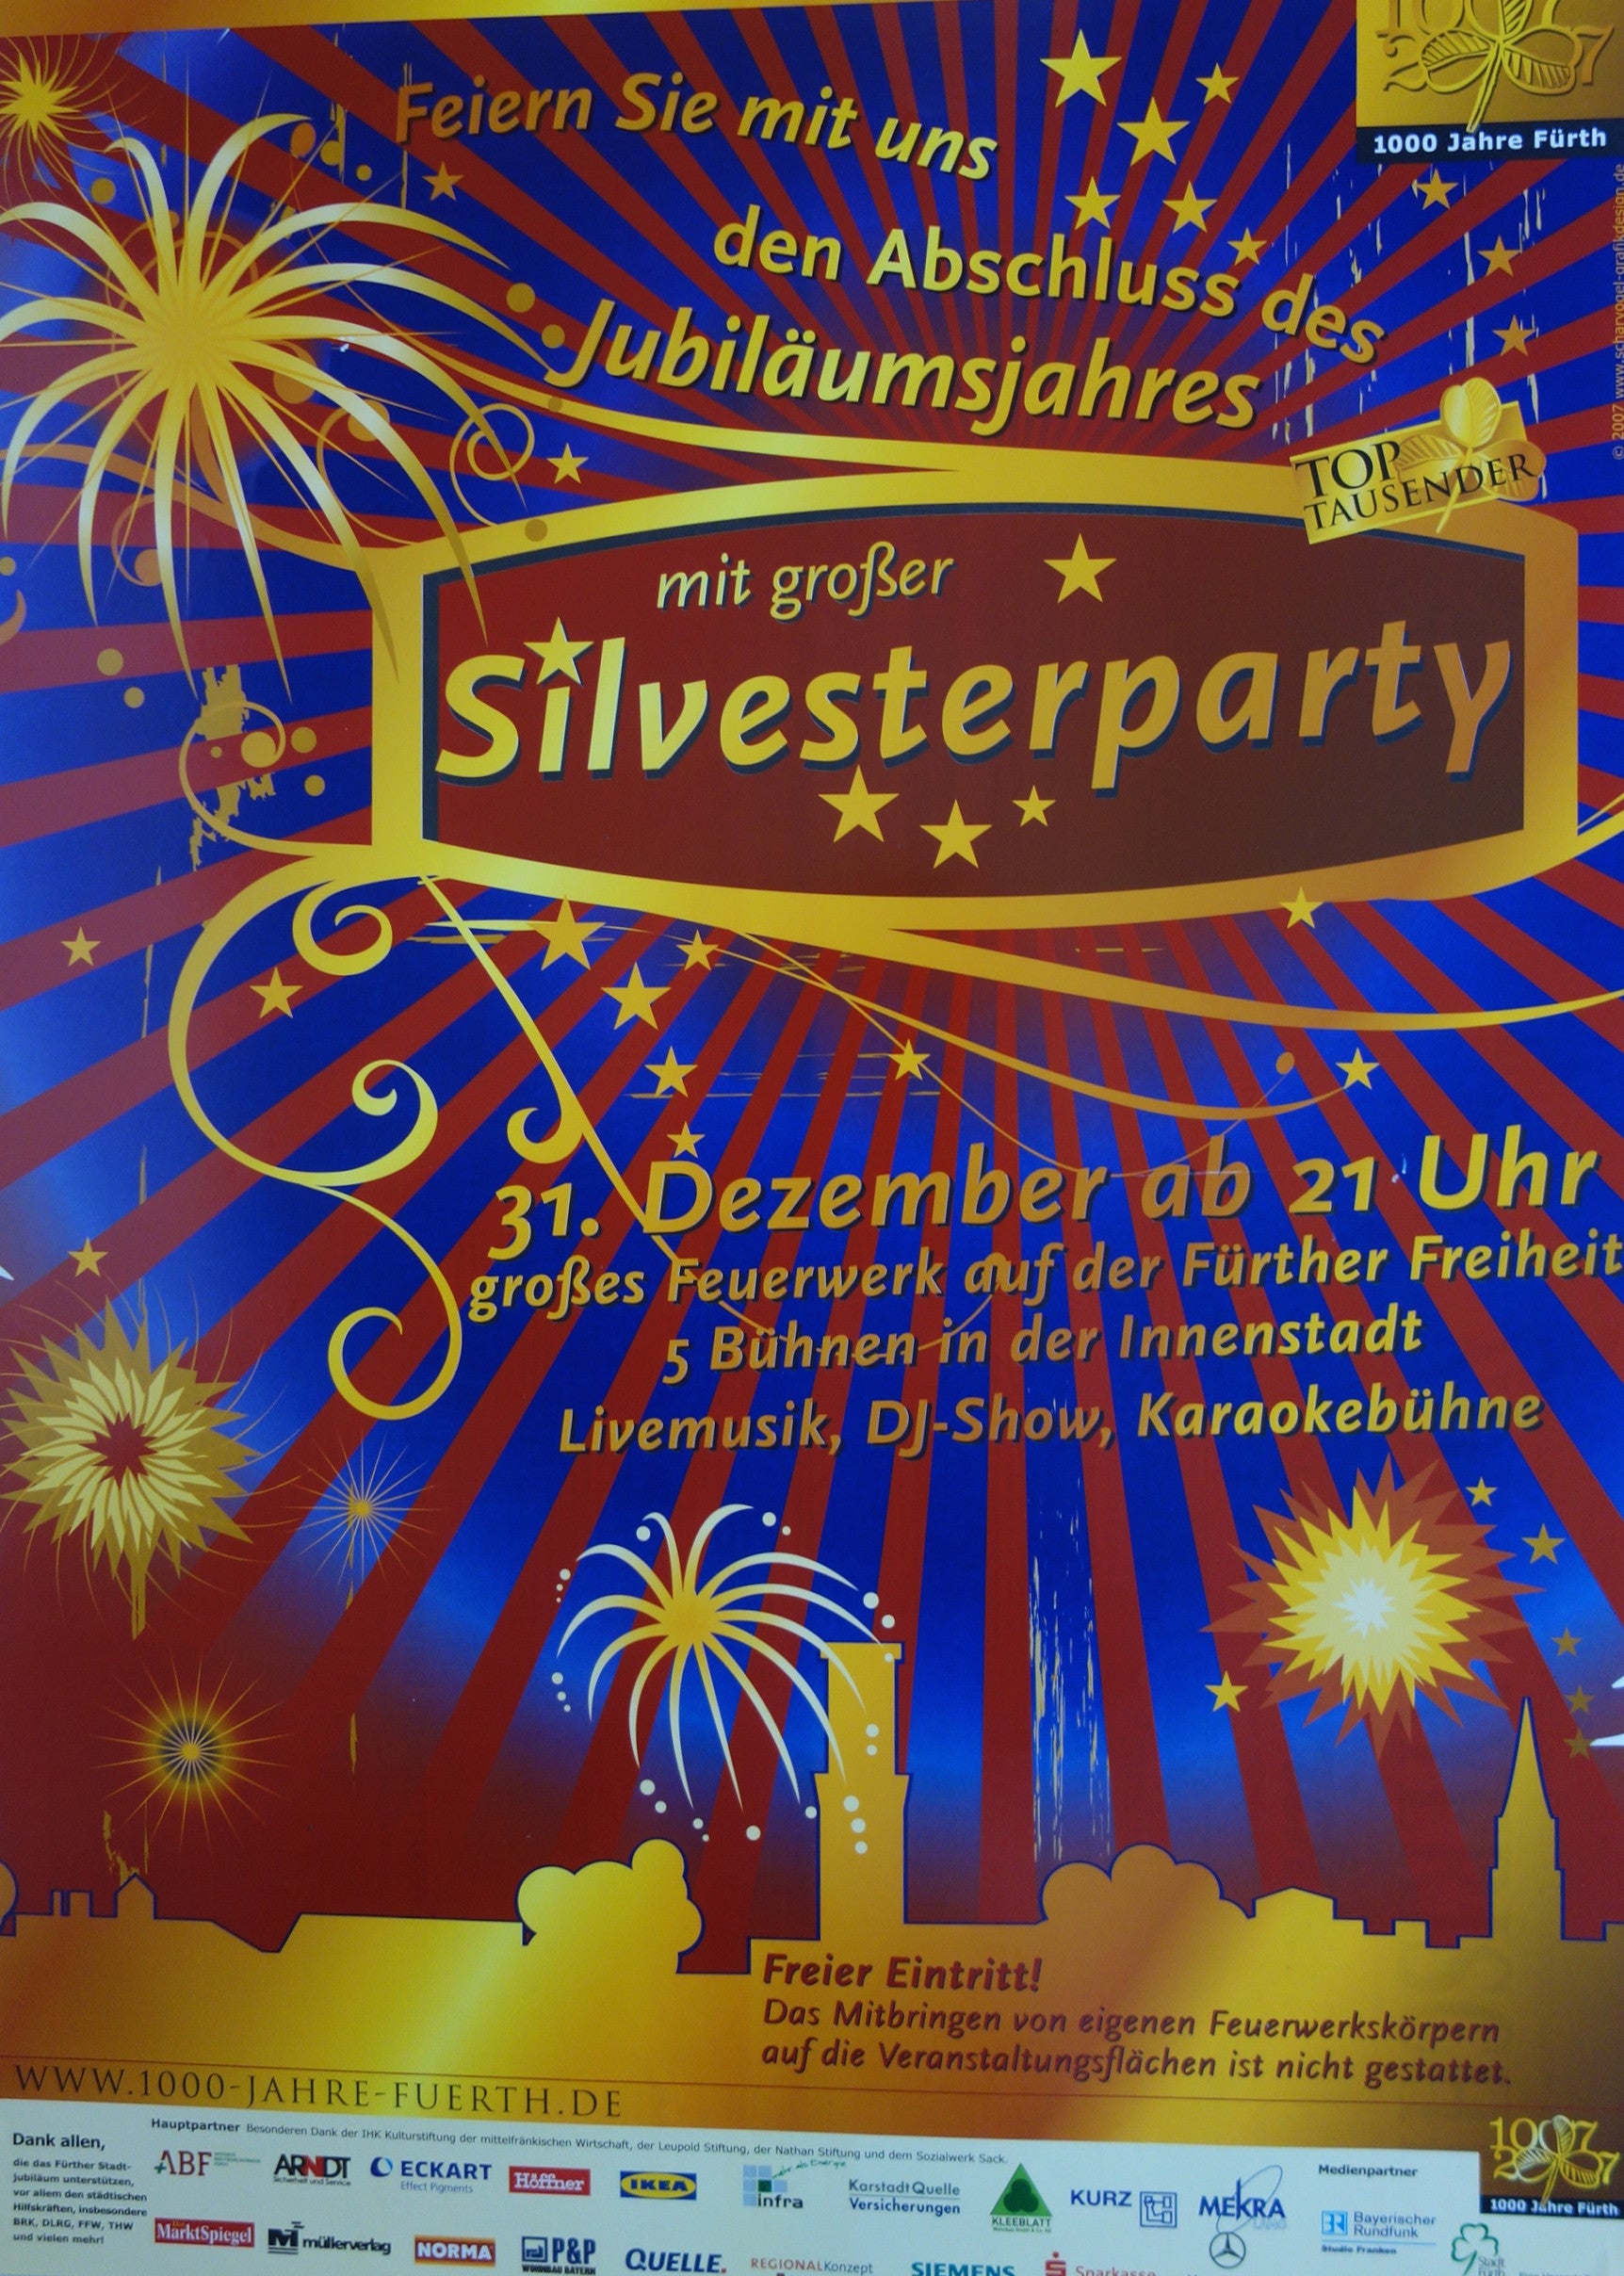 New Years Eve - Silvesterparty